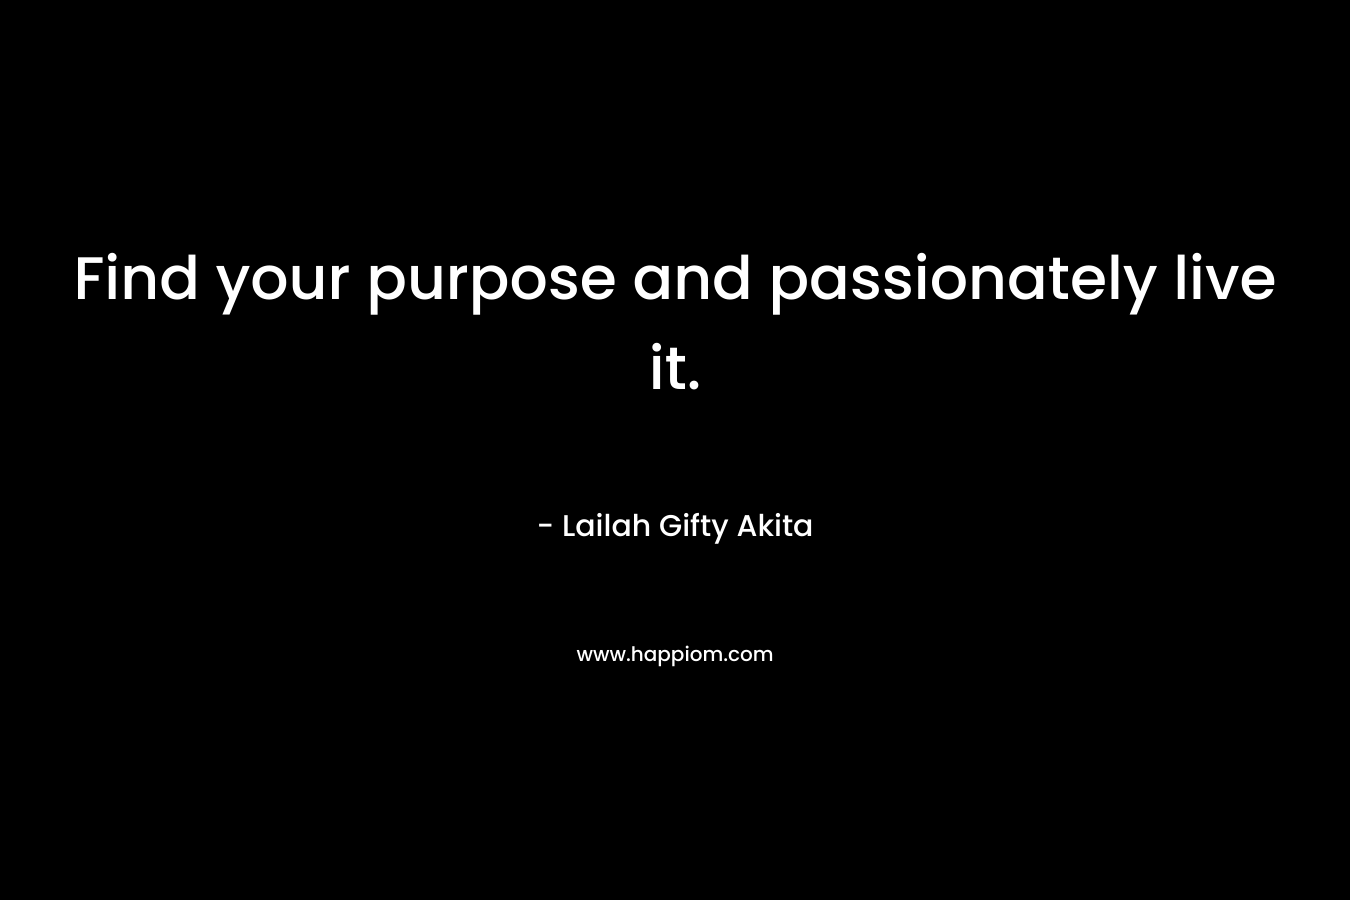 Find your purpose and passionately live it.